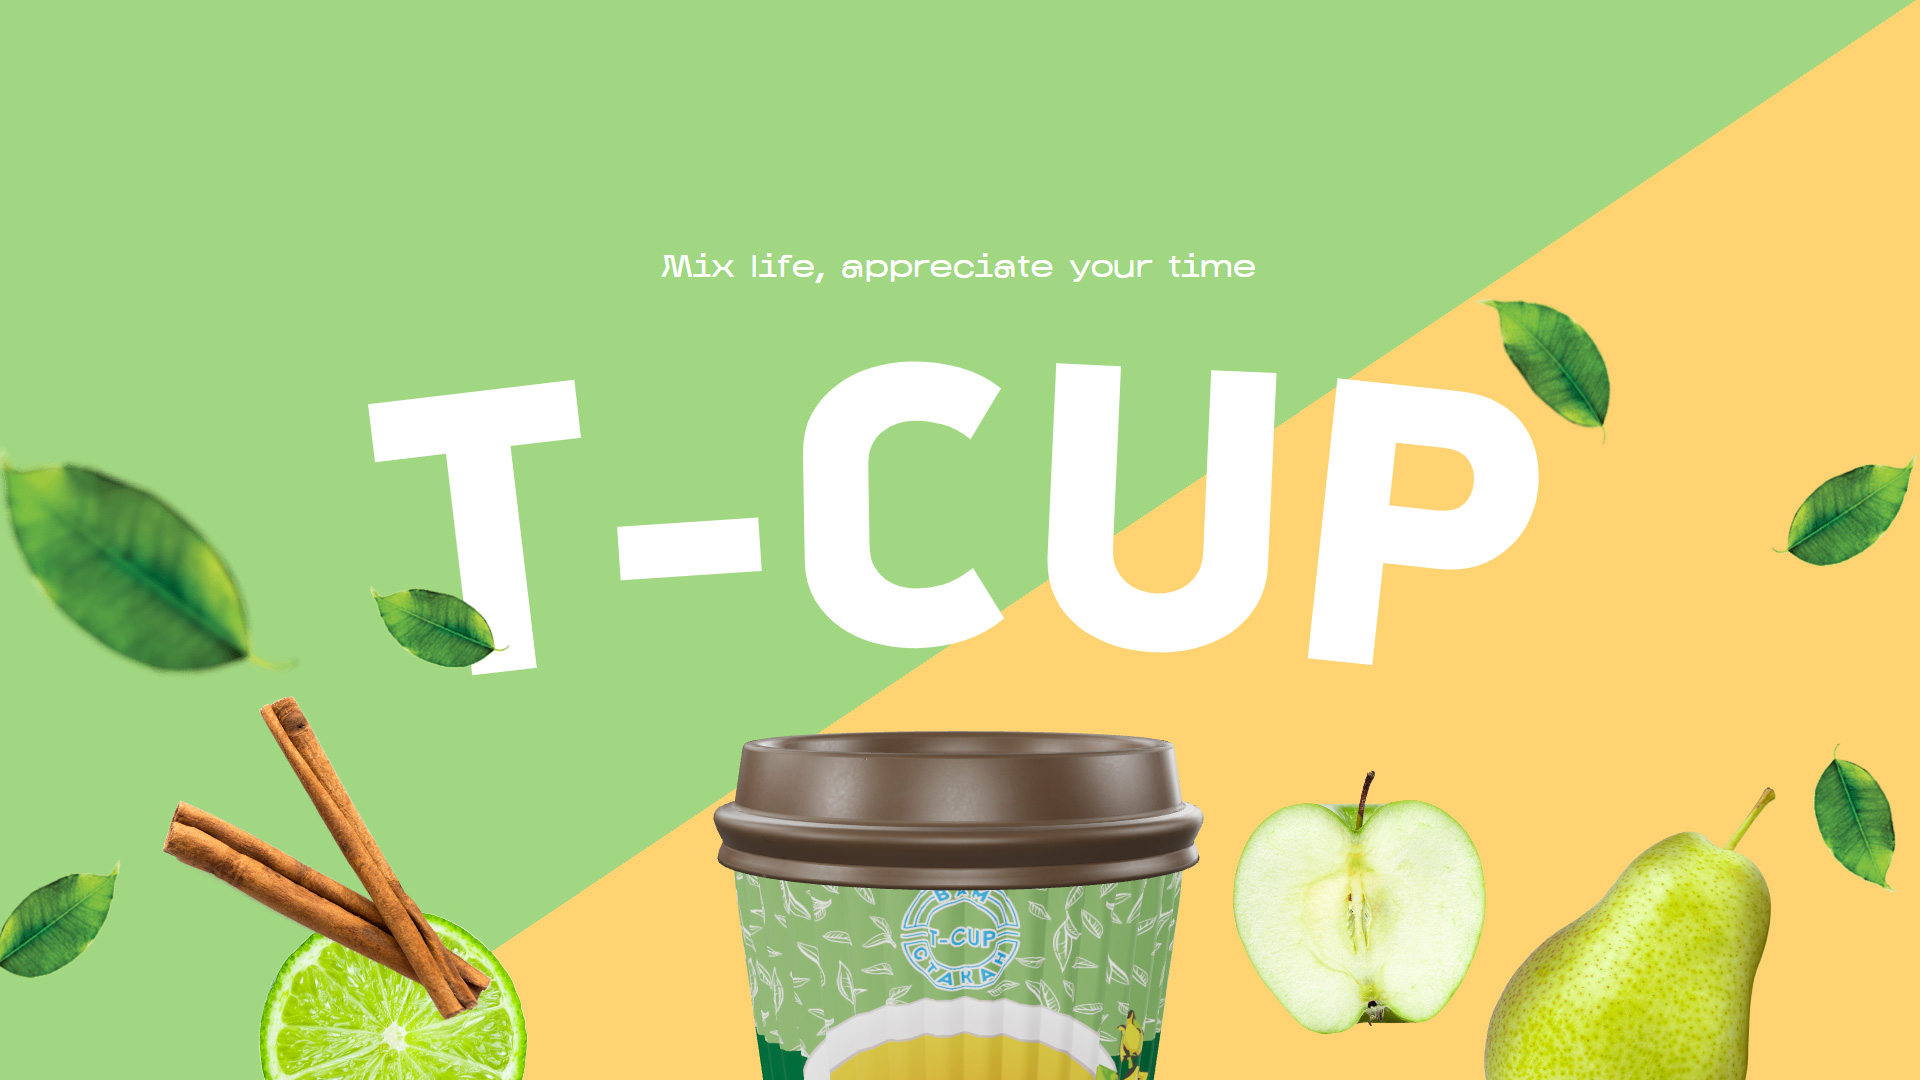 T-CUP